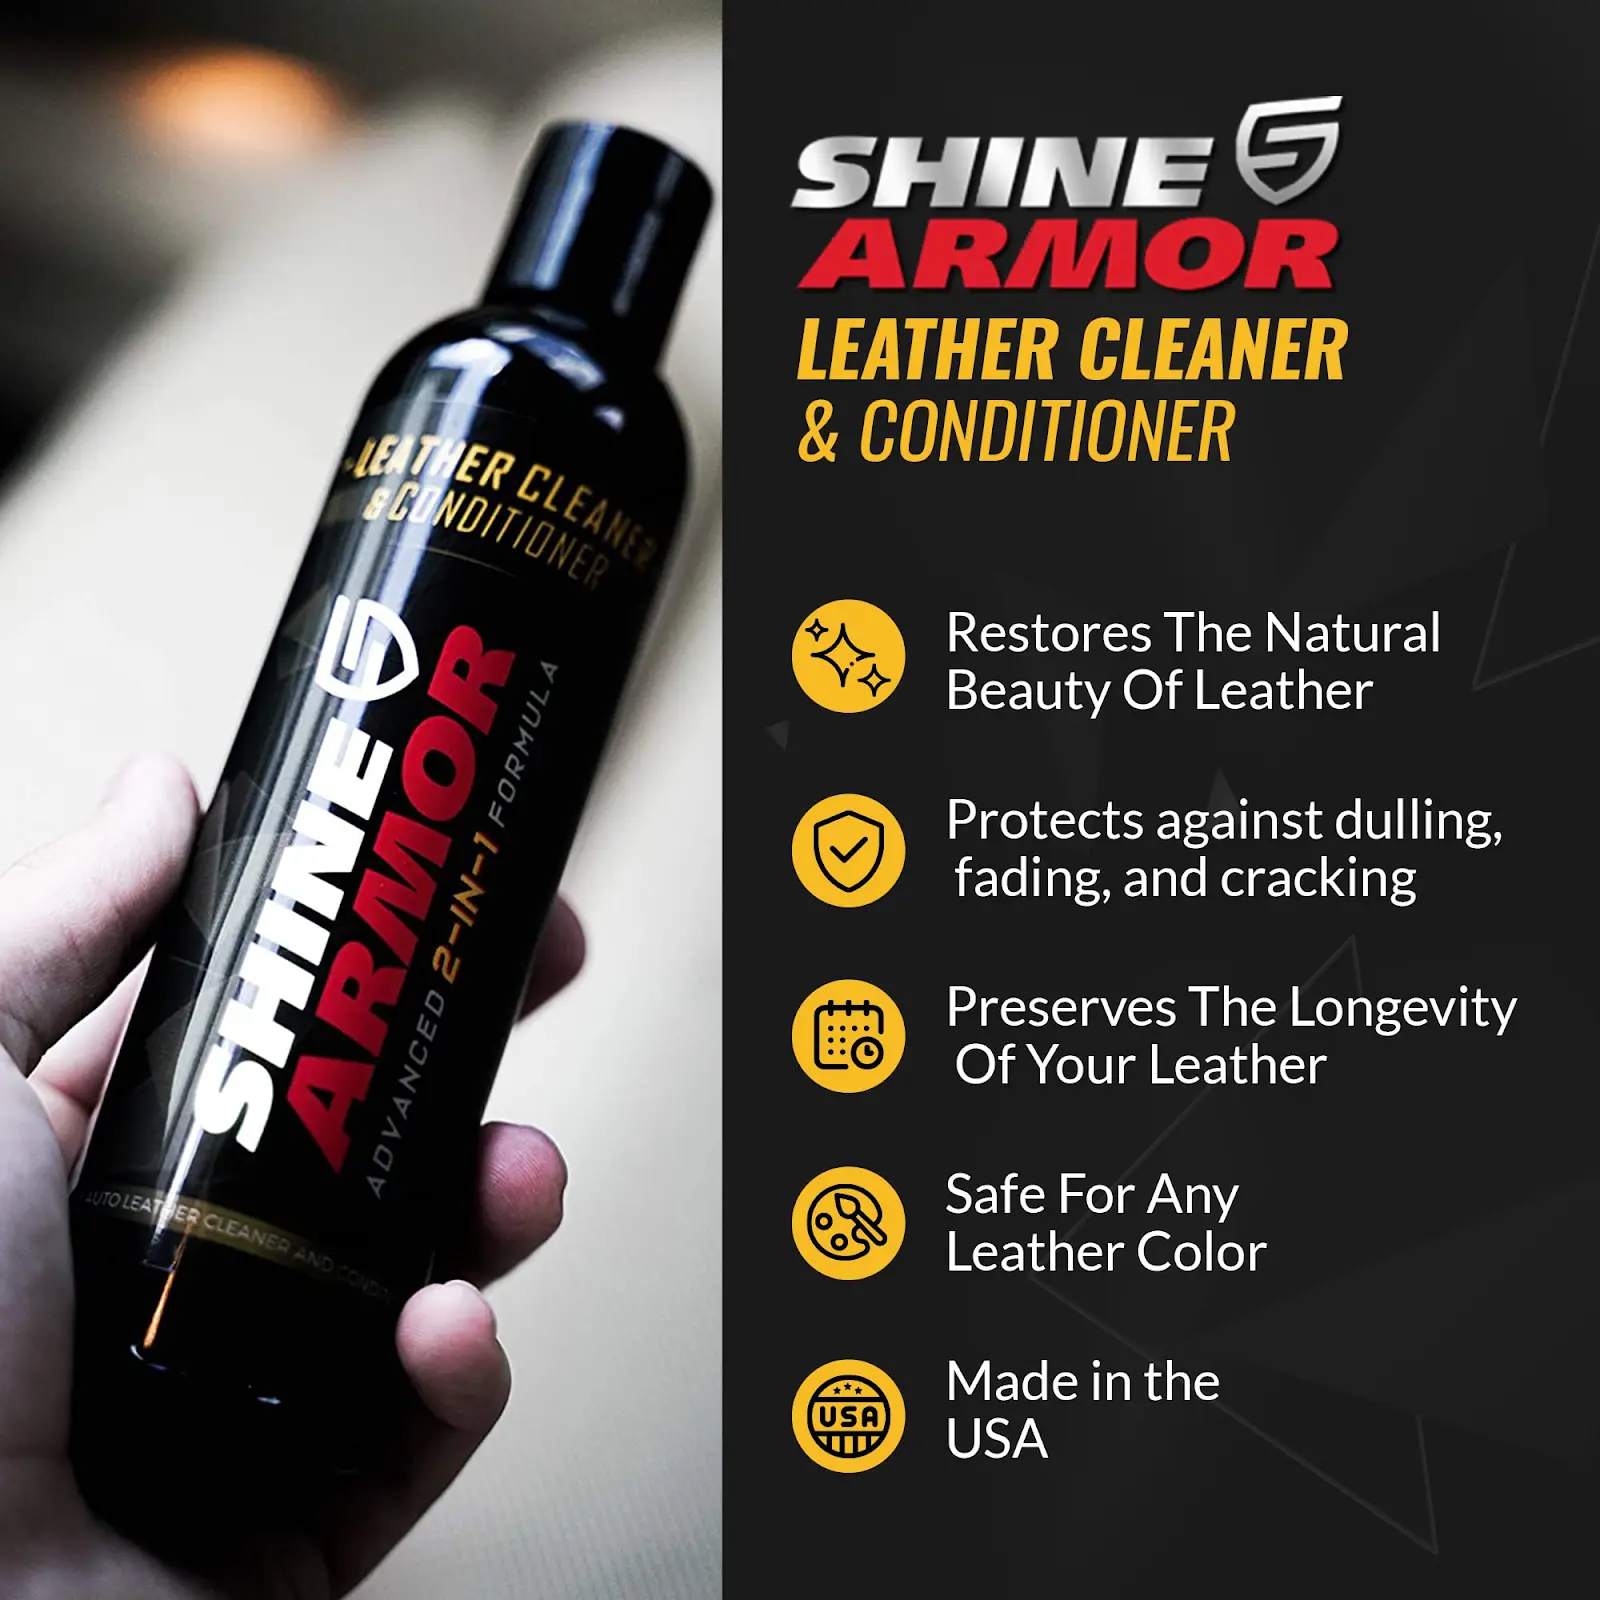 Shine armor leather cleaner and conditioner